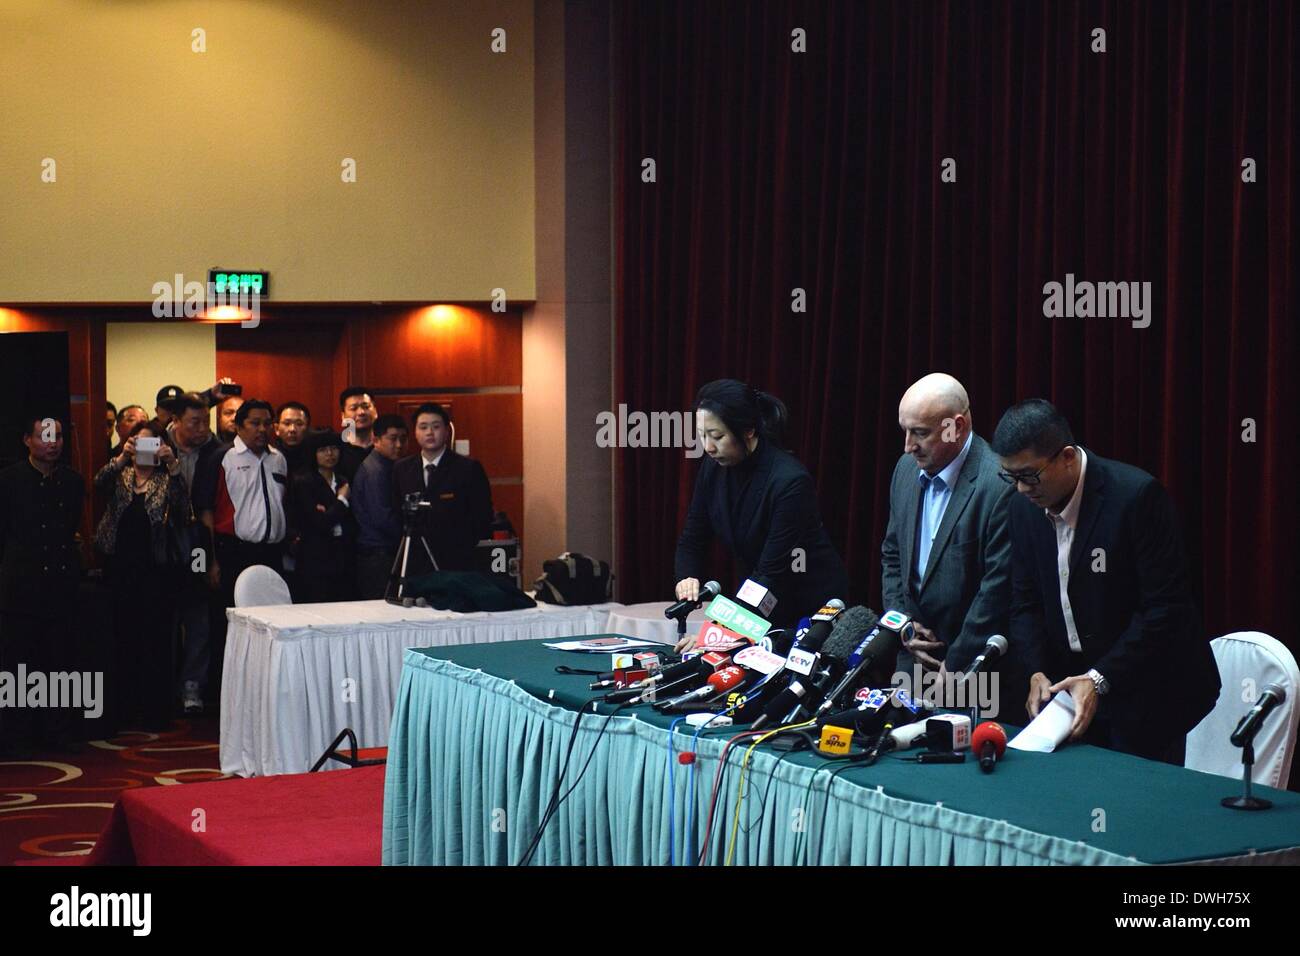 Beijing, China. 9th Mar, 2014. Representatives of the Malaysia Airlines bow to the media before the press conference in Beijing on missing flight MH 370 on March 9, 2014. Credit:  Wang Quanchao/Xinhua/Alamy Live News Stock Photo